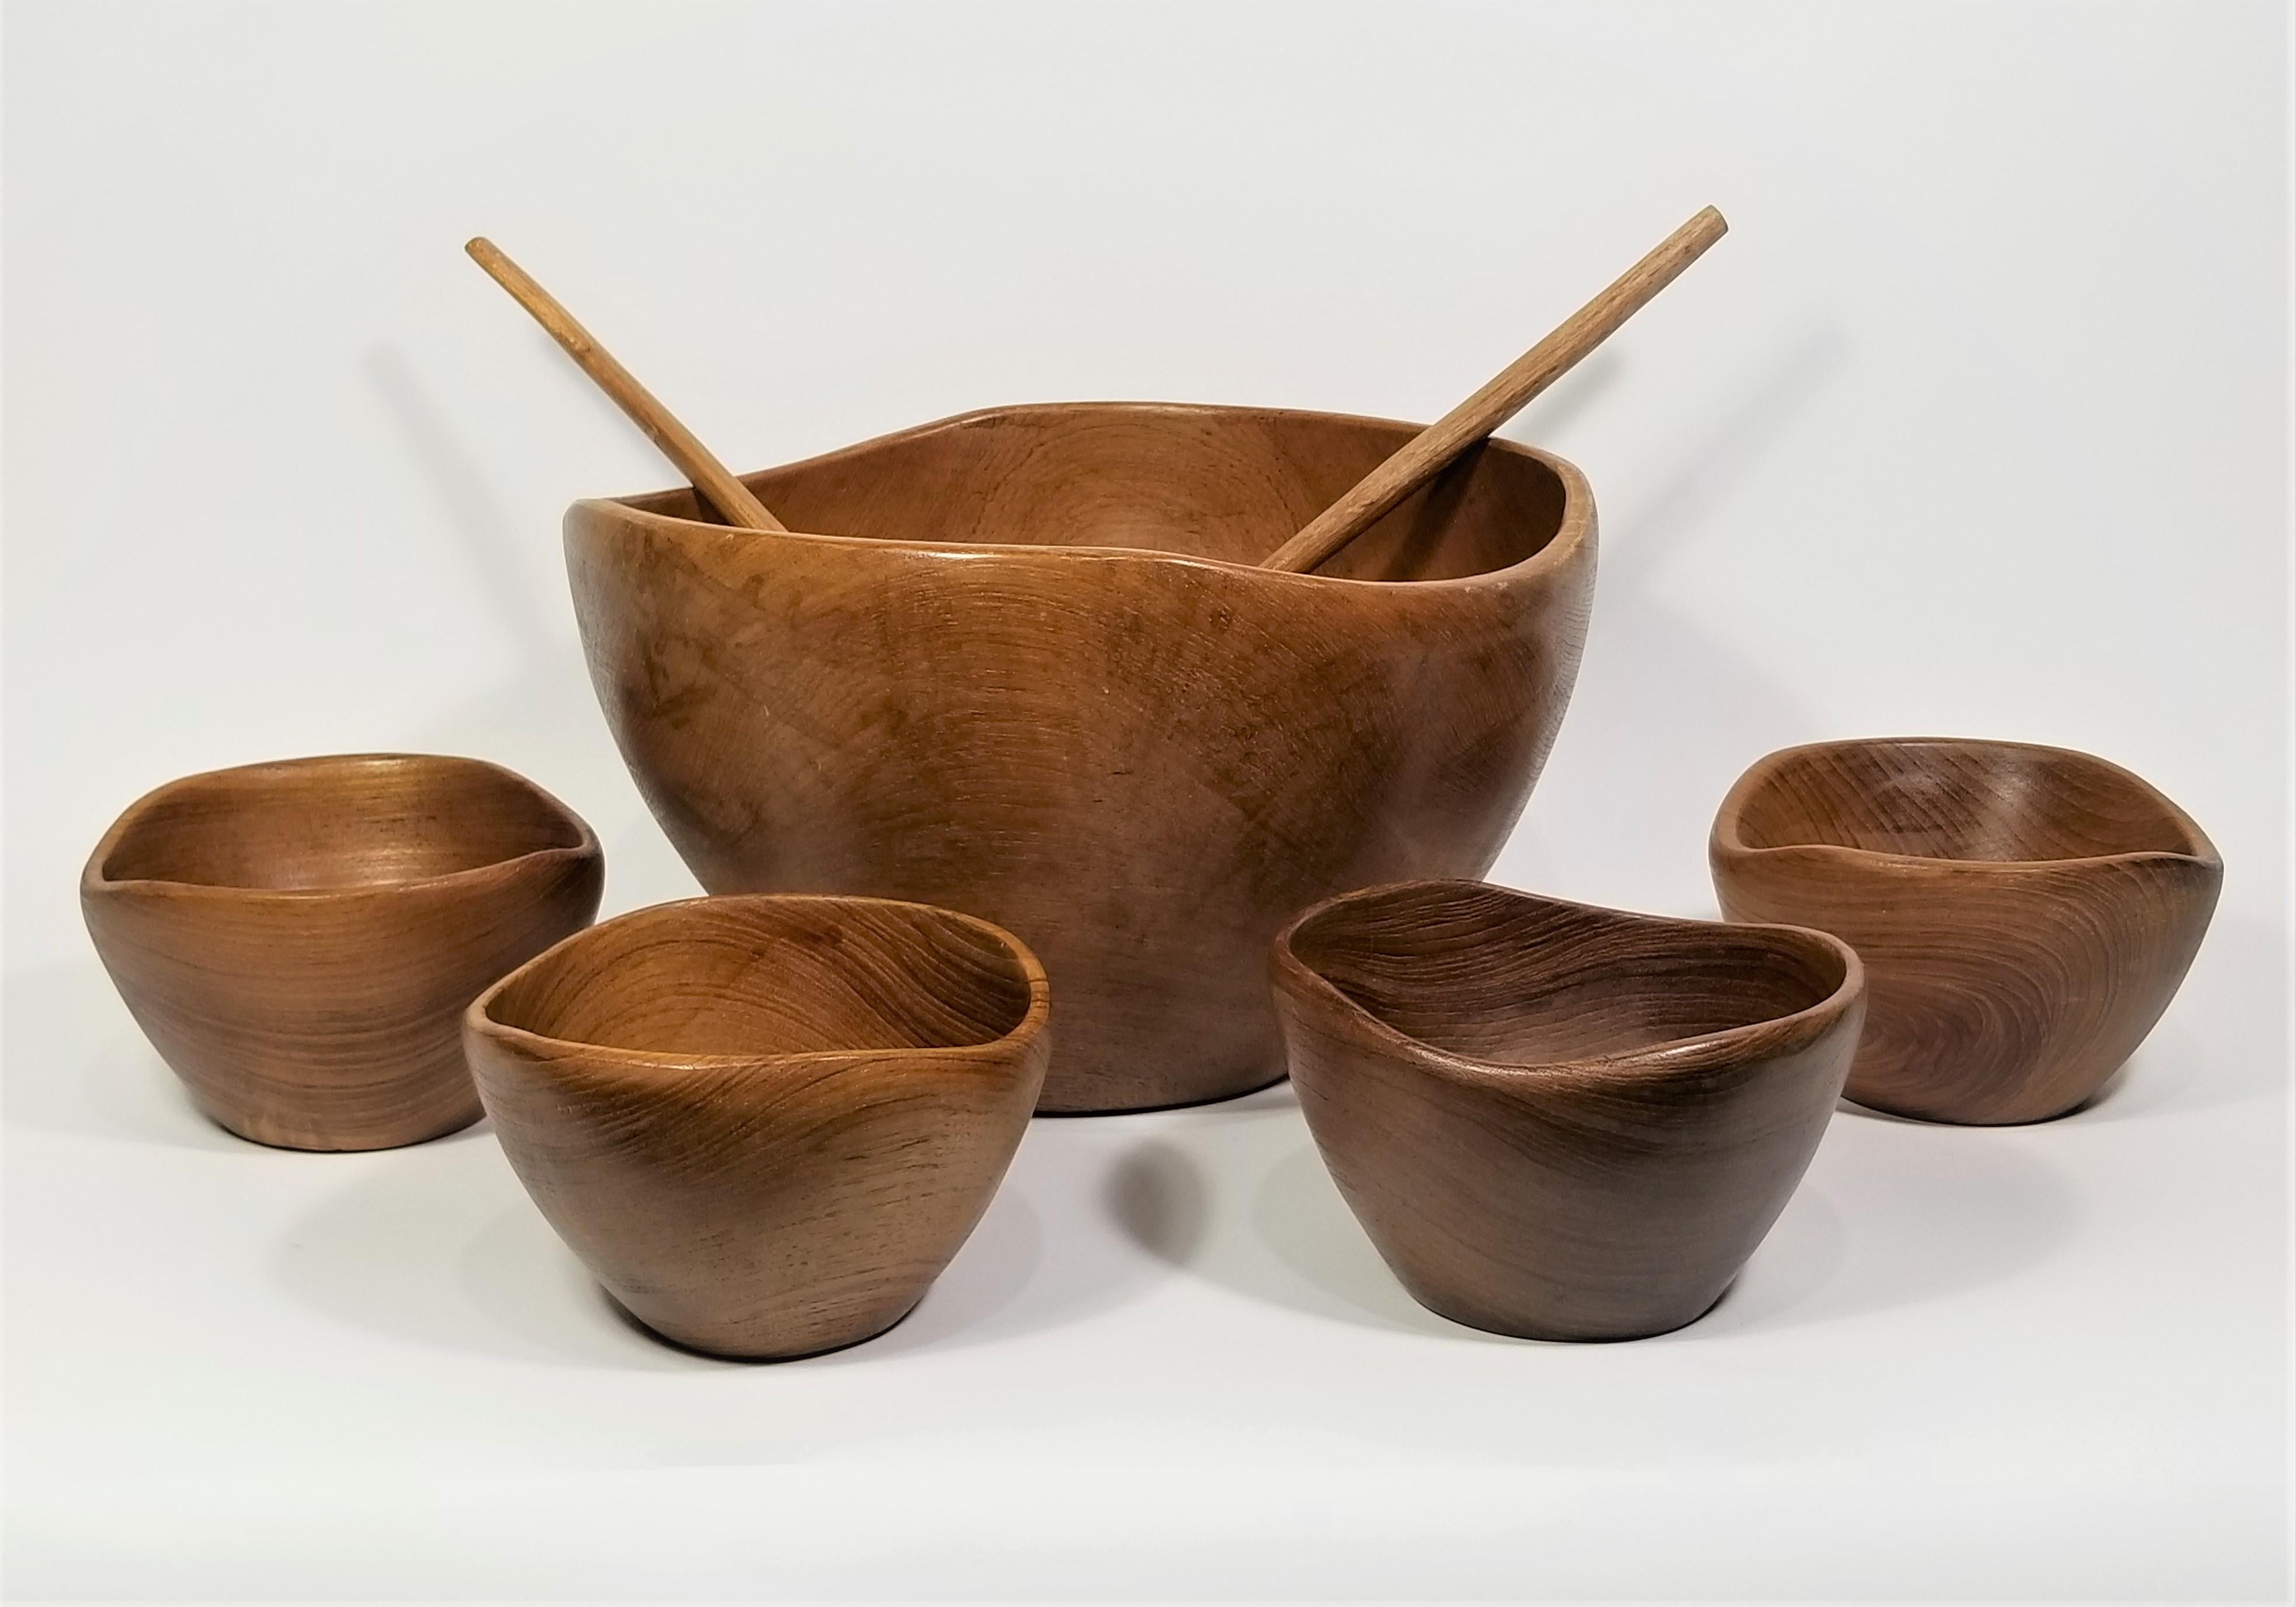 Mid century teak bowls set. Hand Turned. Includes 1 Large bowl, 4 small bowl and 2 serving utensils. 

Measurements:
Big Bowls Height: 7.25 inches
Big Bowls Diameter: 12.0 inches

Small Bowls Height: 3.5 inches
Small Bowls Diameter: 5.88